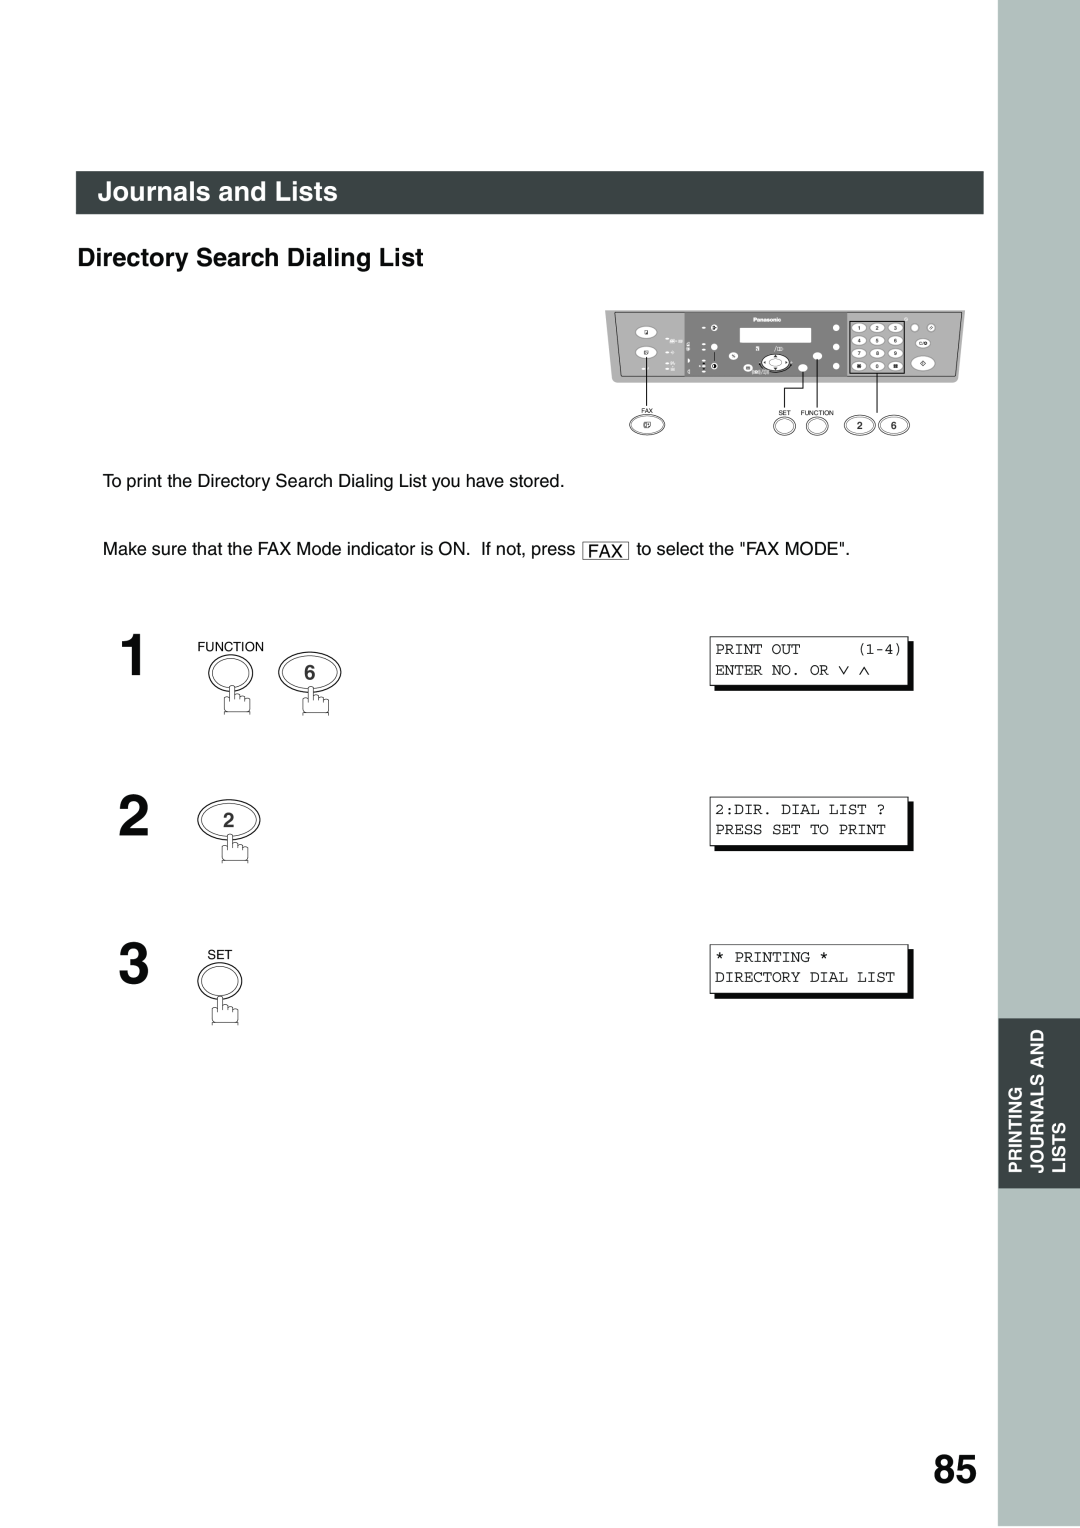 Panasonic DP-135FP appendix Directory Search Dialing List, Journals and Lists, Print, Enter, Or ∨ ∧, Function, 1 2 4 5 7 8 